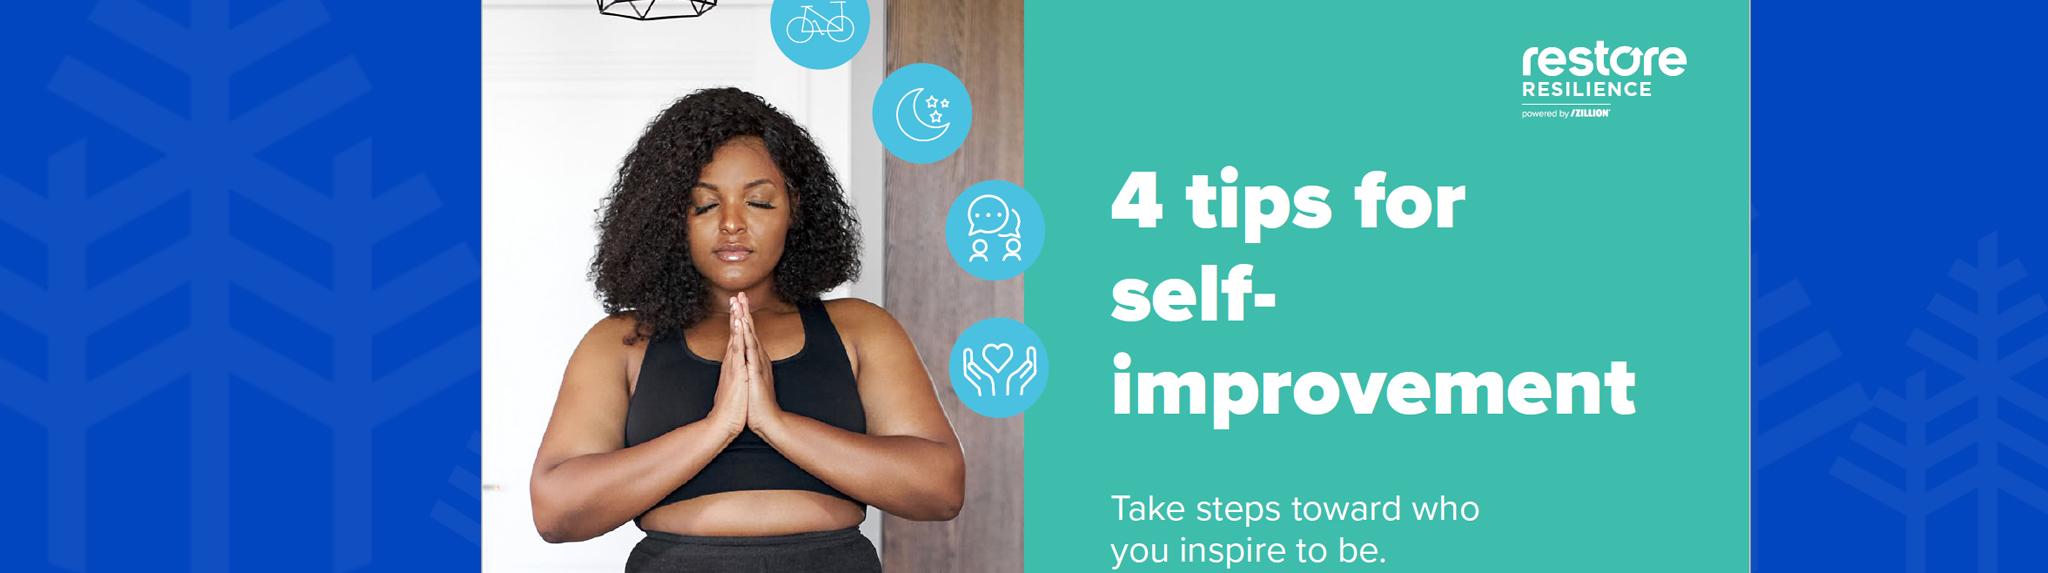 Restore Resilience, 4 steps for self-improvement